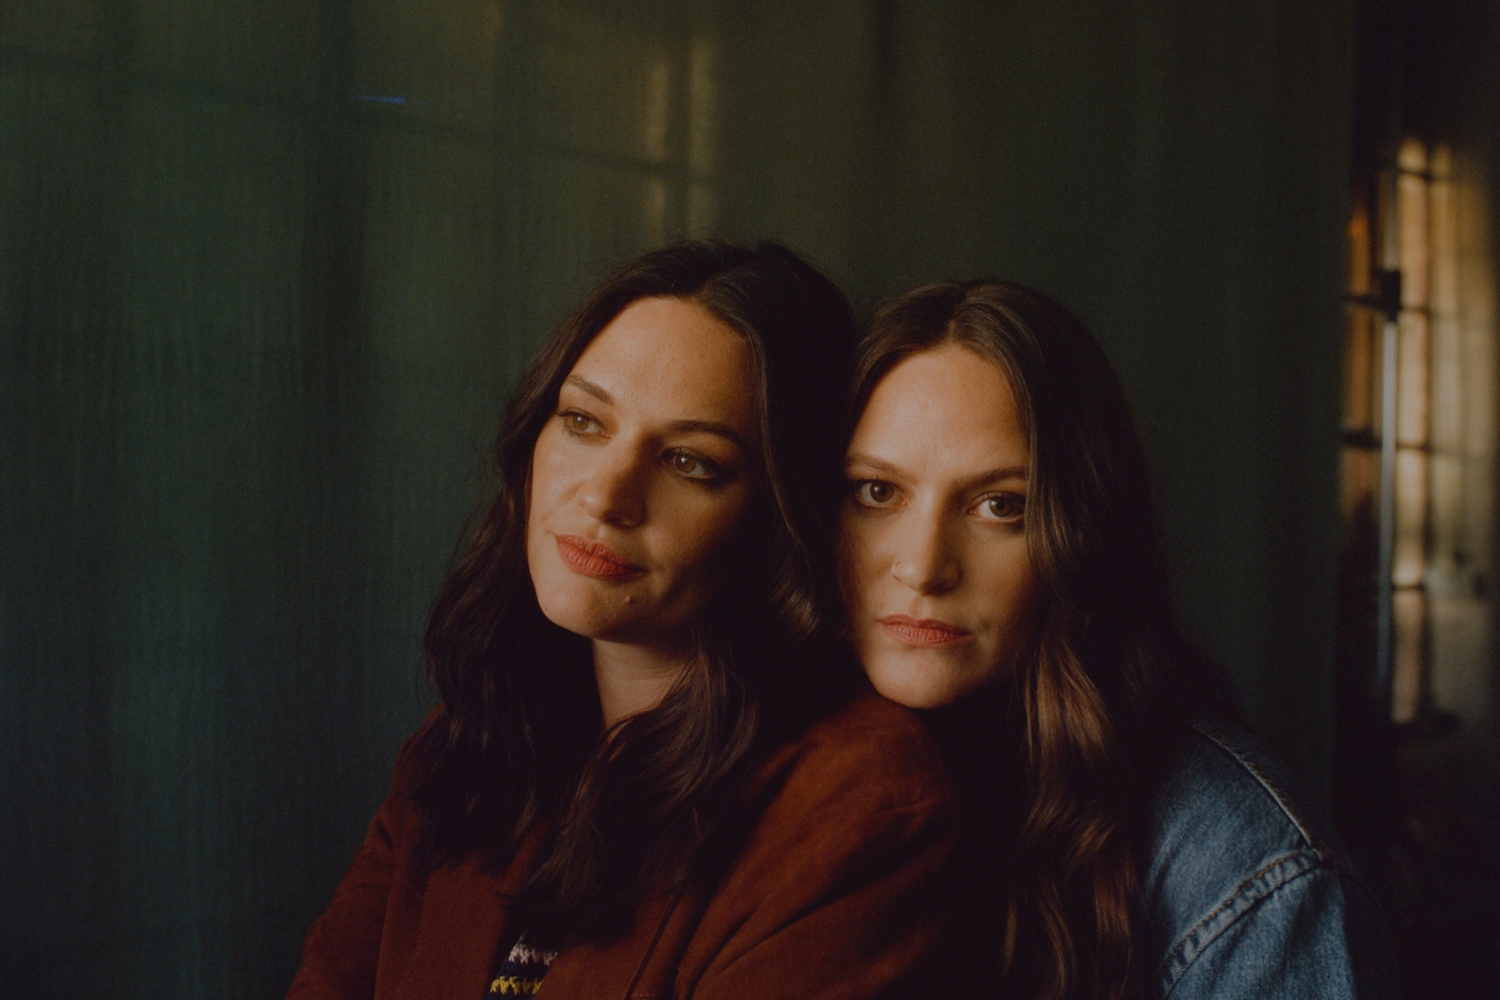 The Staves to play UK and EU tour in support of new album ‘All Now’